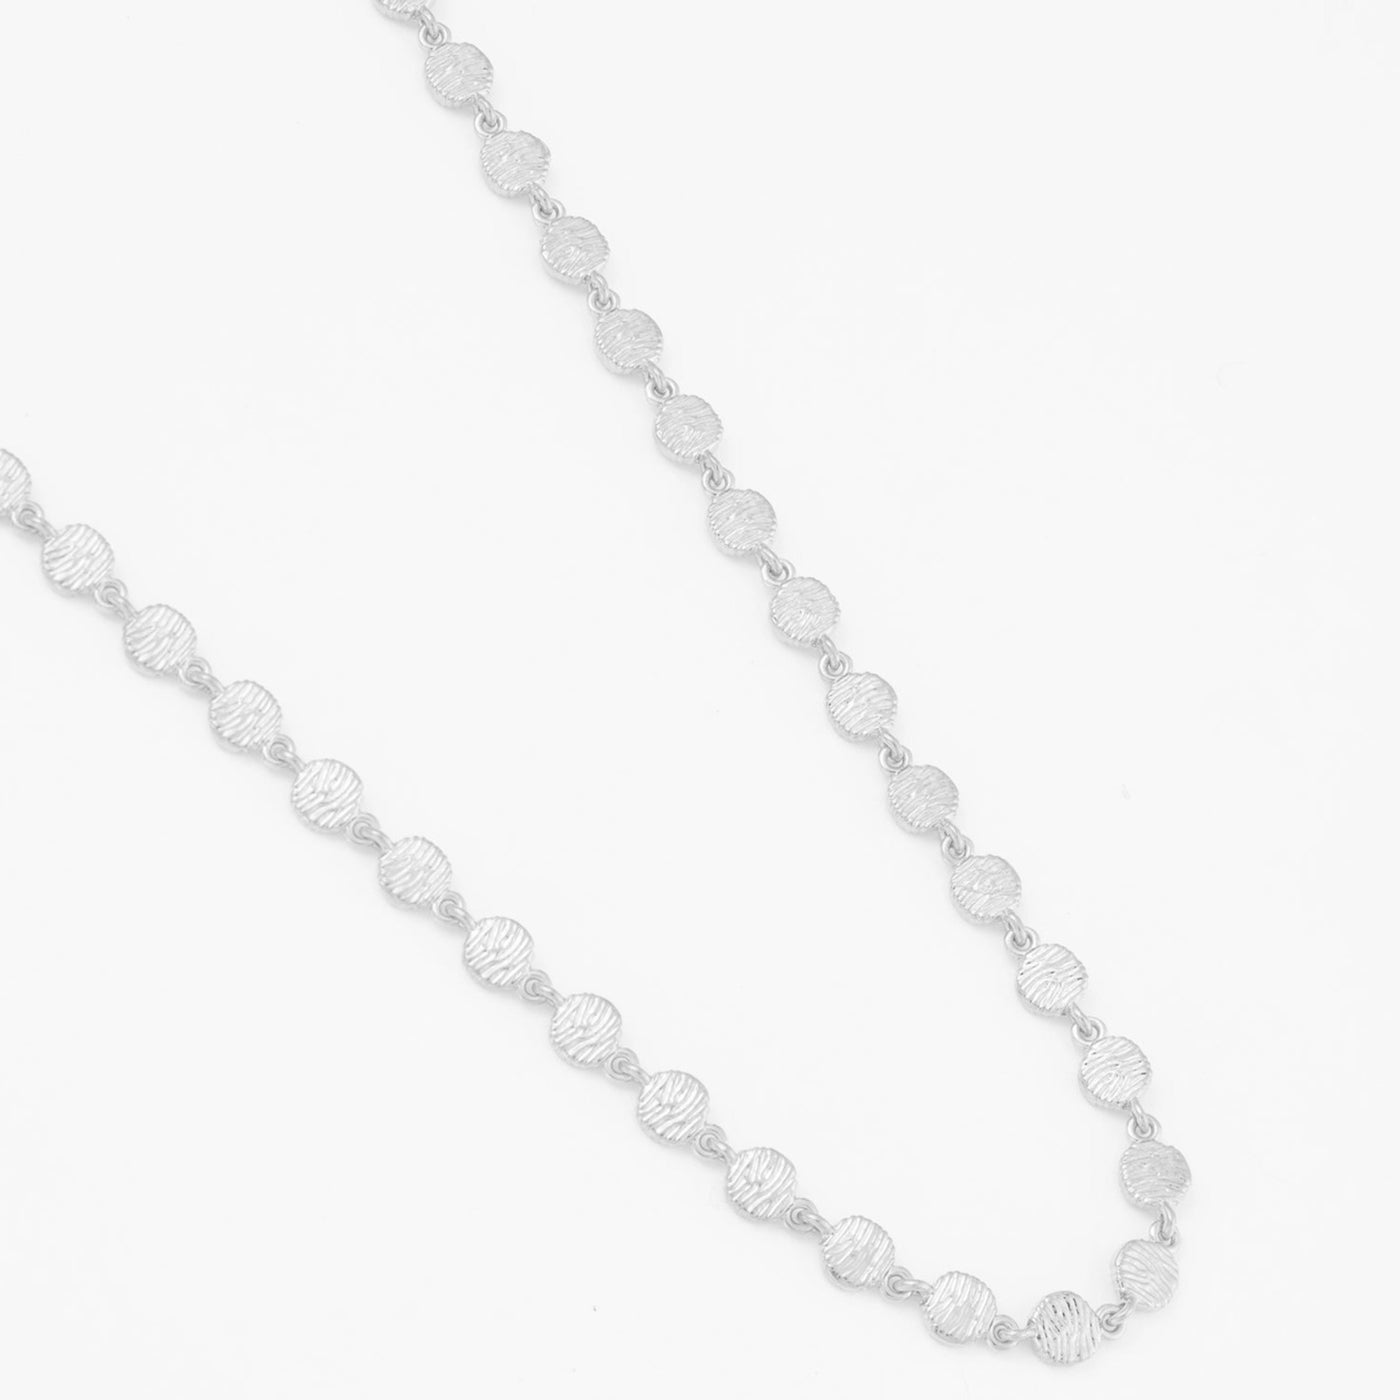 Kirstin Ash Reflection Chain Necklace, Silver